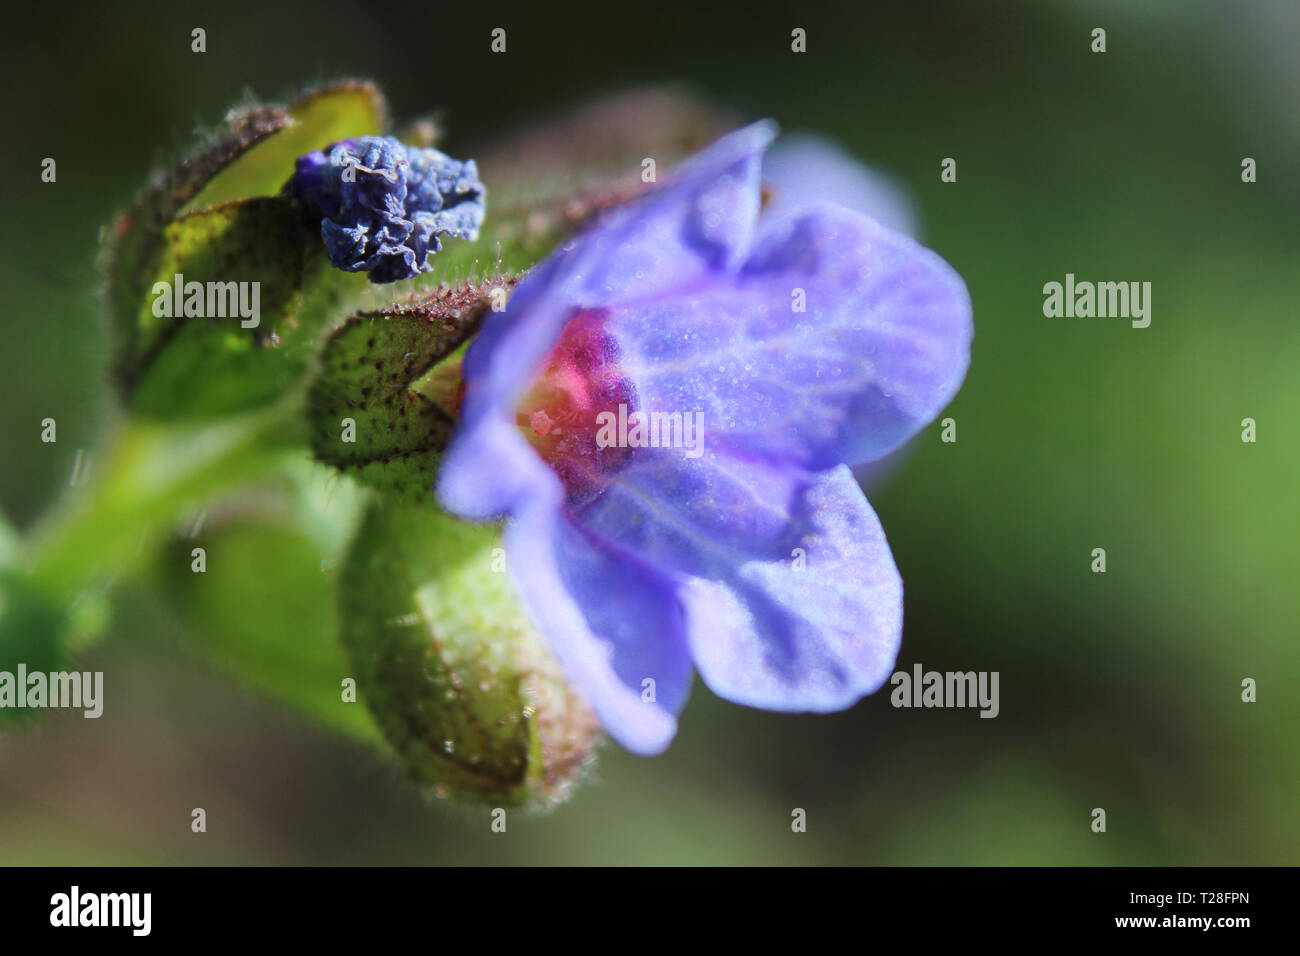 The unfurling spring bud, of a blue pulmonaria officinalis flower in extreme close up in a natural setting. With copy space. Stock Photo